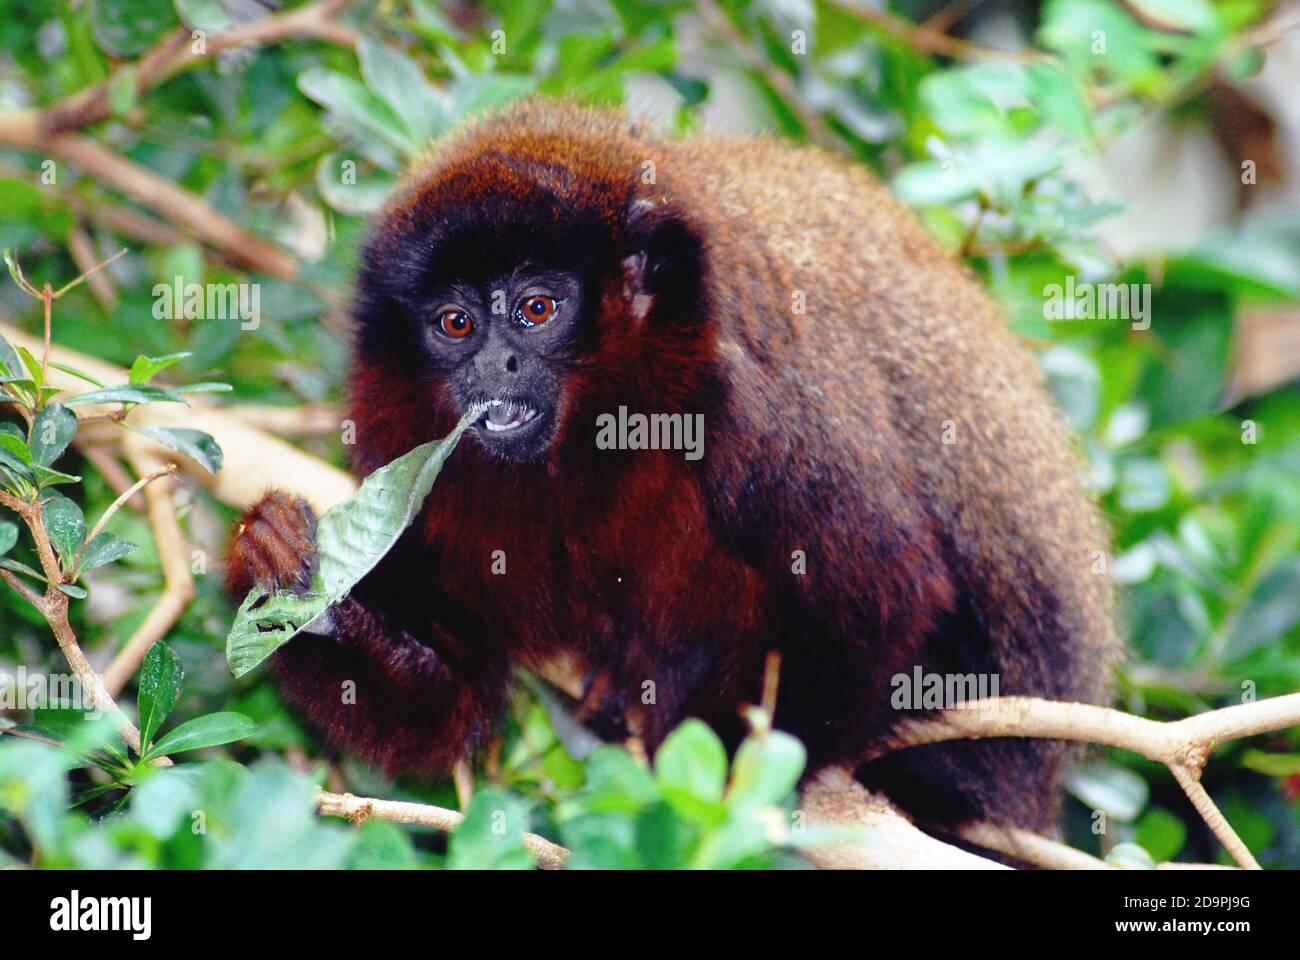 Titi, Endangered, Nocturnal, South America